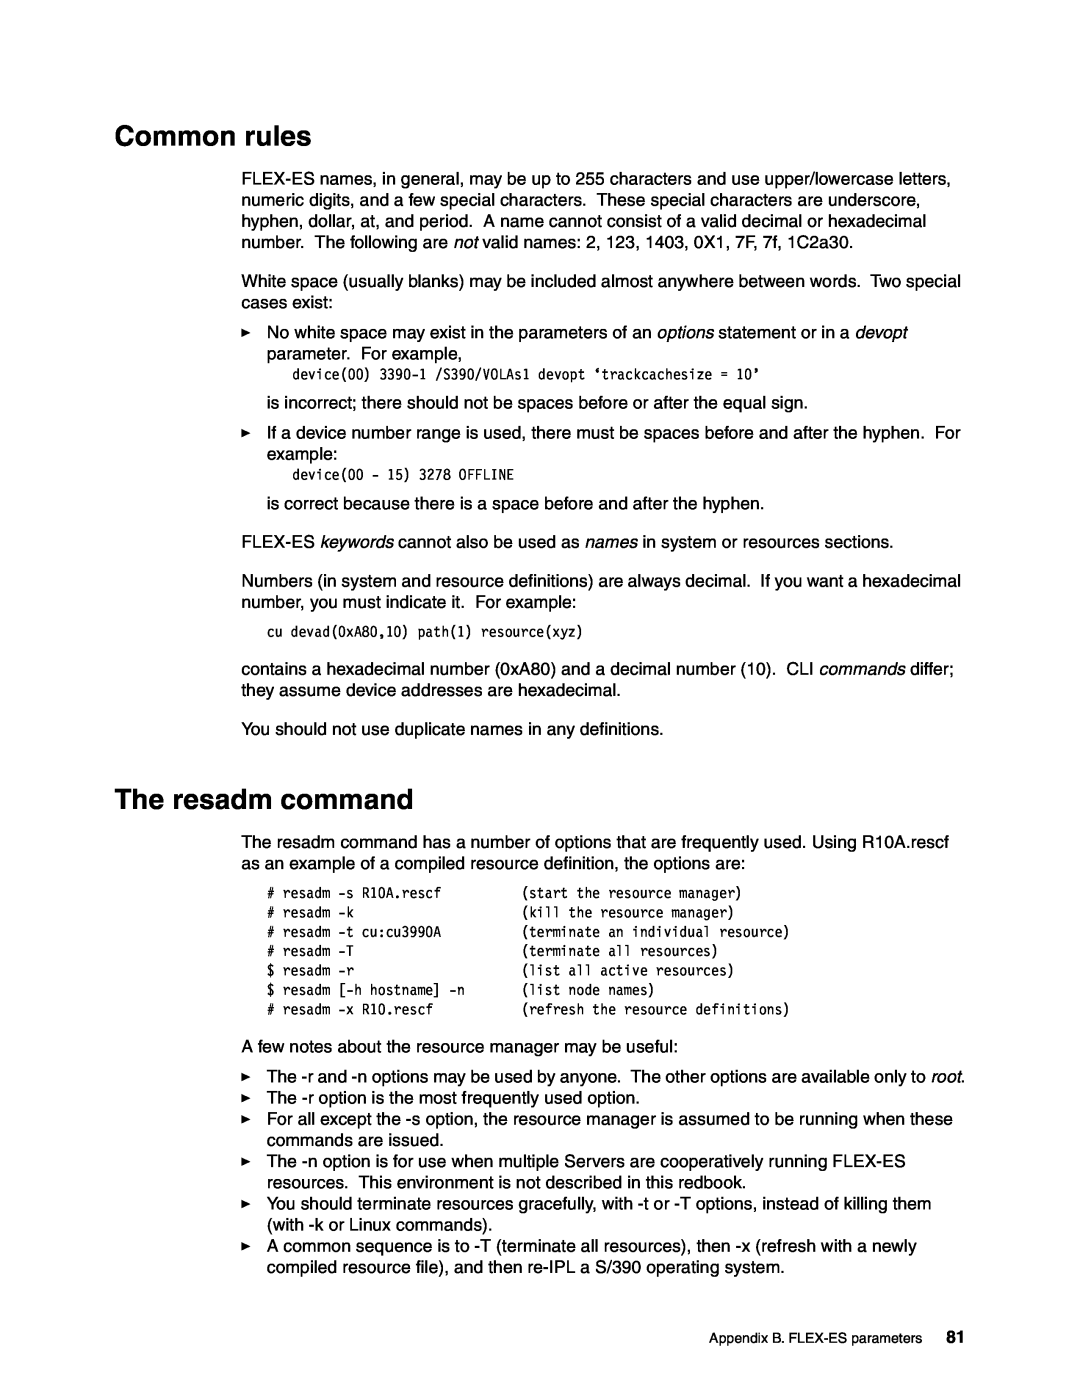 IBM s/390 manual Common rules, The resadm command 